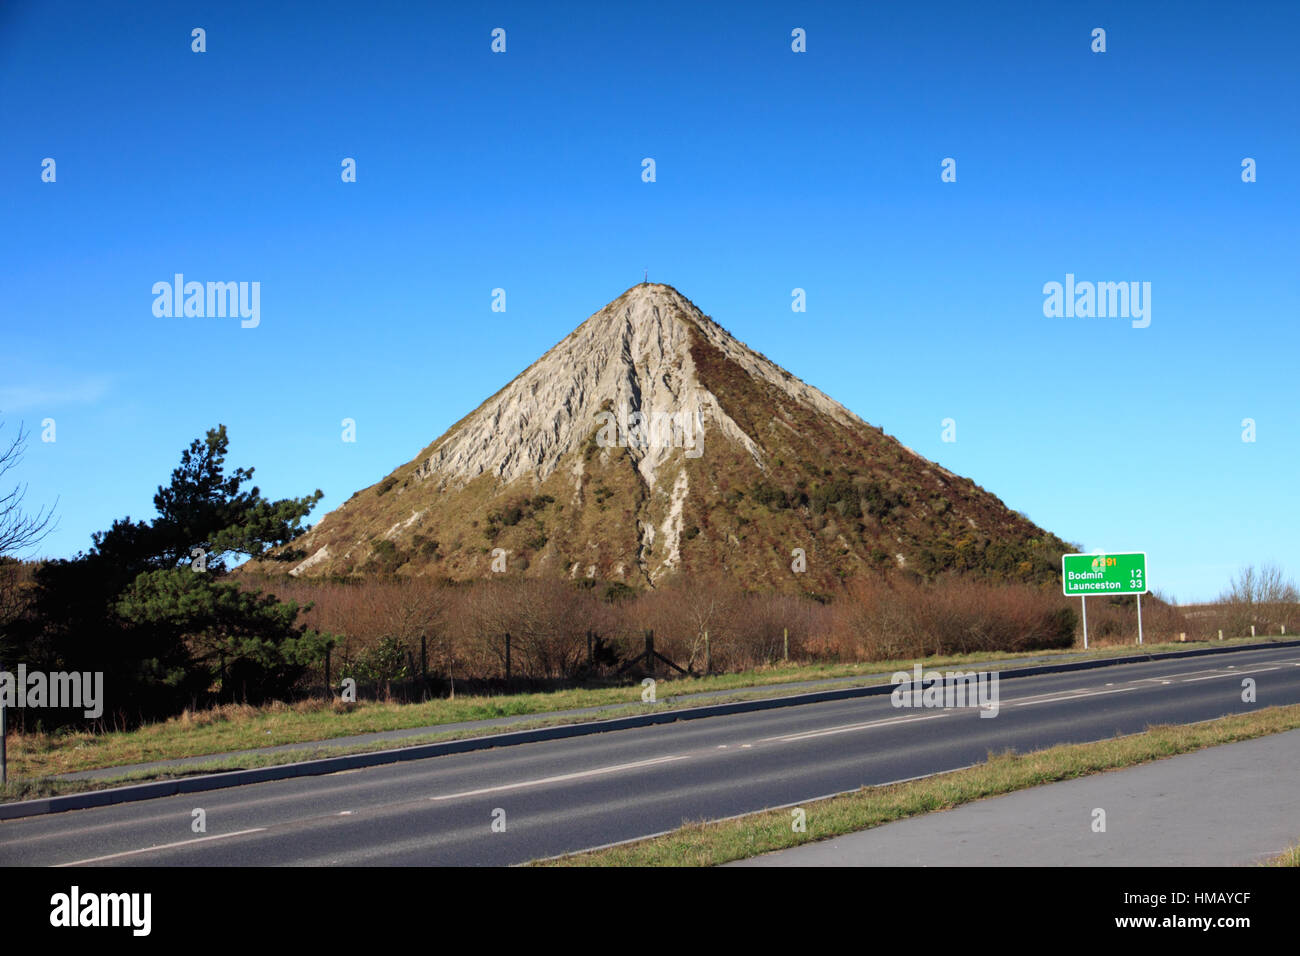 The Skytip, St Austell, Cornwall, is a pyramid of china clay waste typical of the landscape in the area 40 years ago.  Today the waste tips are landsc Stock Photo